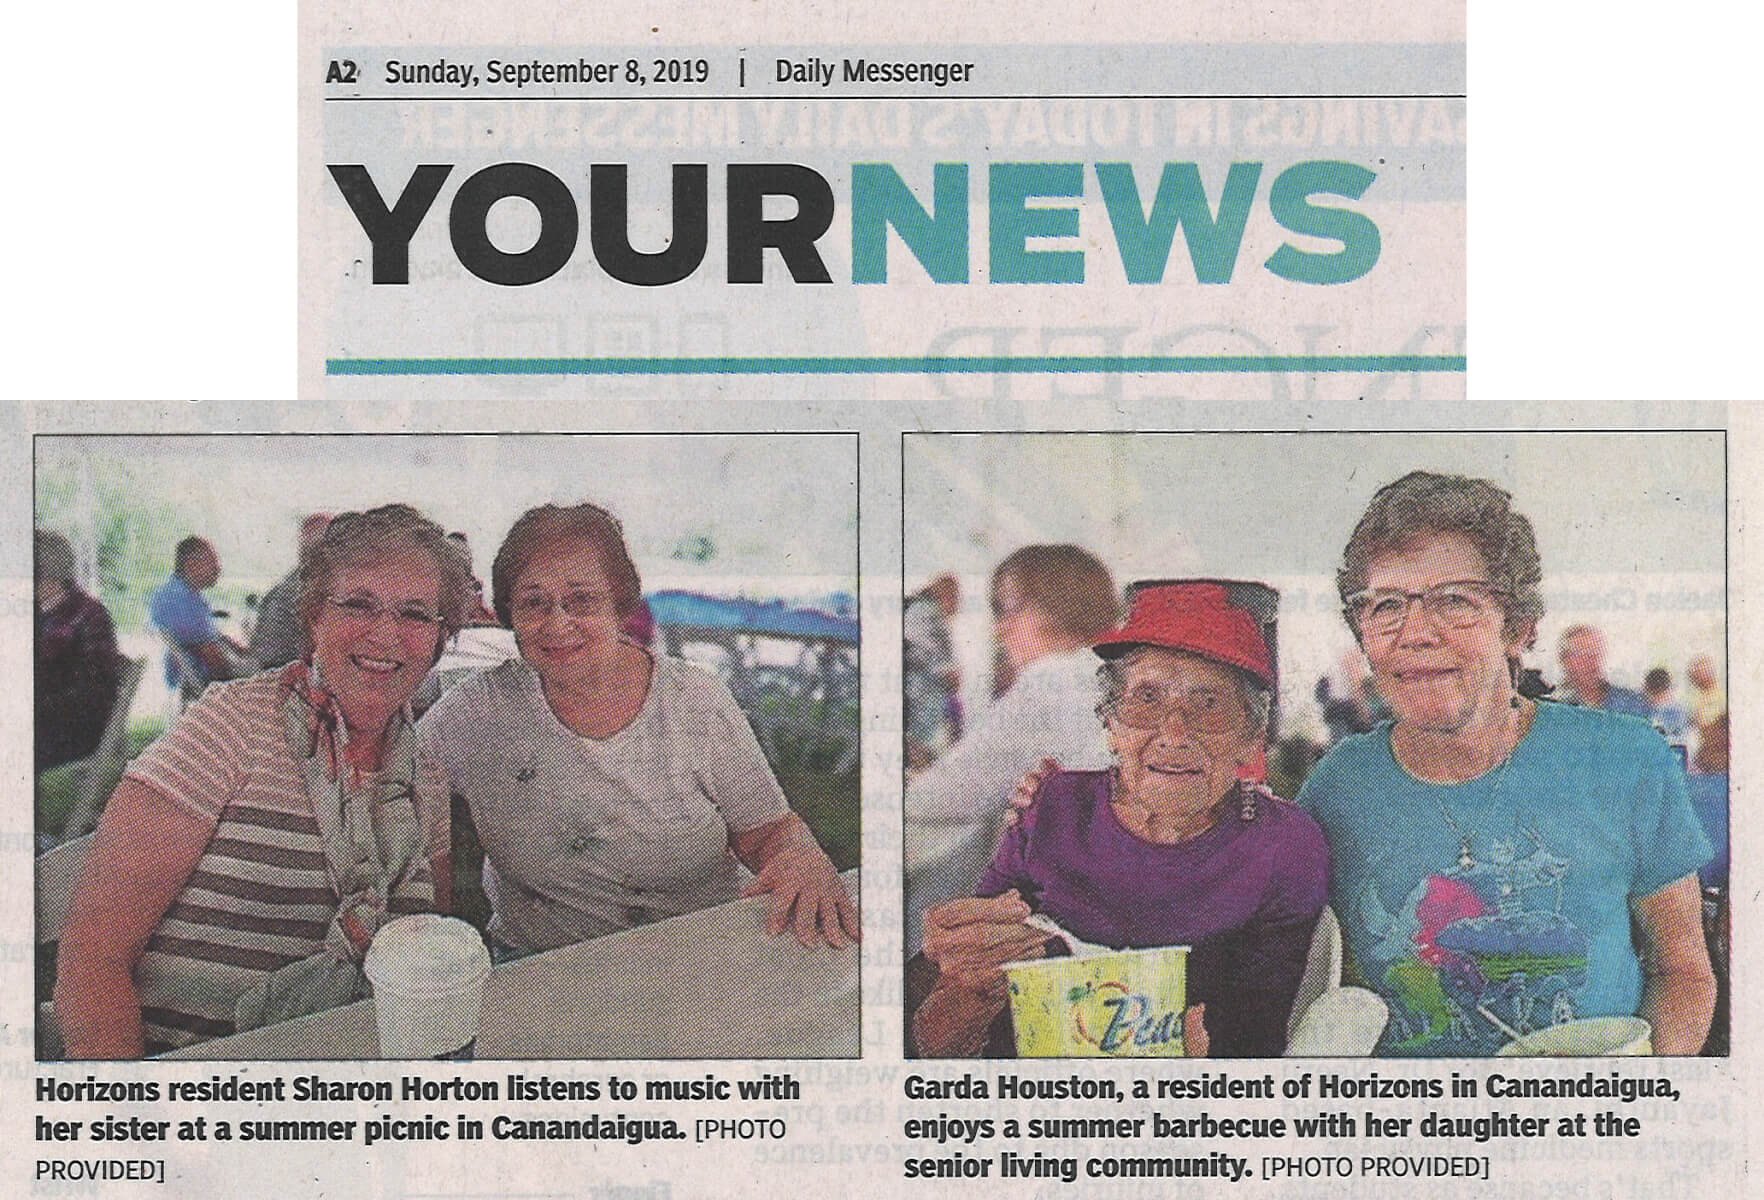 Horizons Family Fun, 9.8.19 Daily Messenger (cropped)